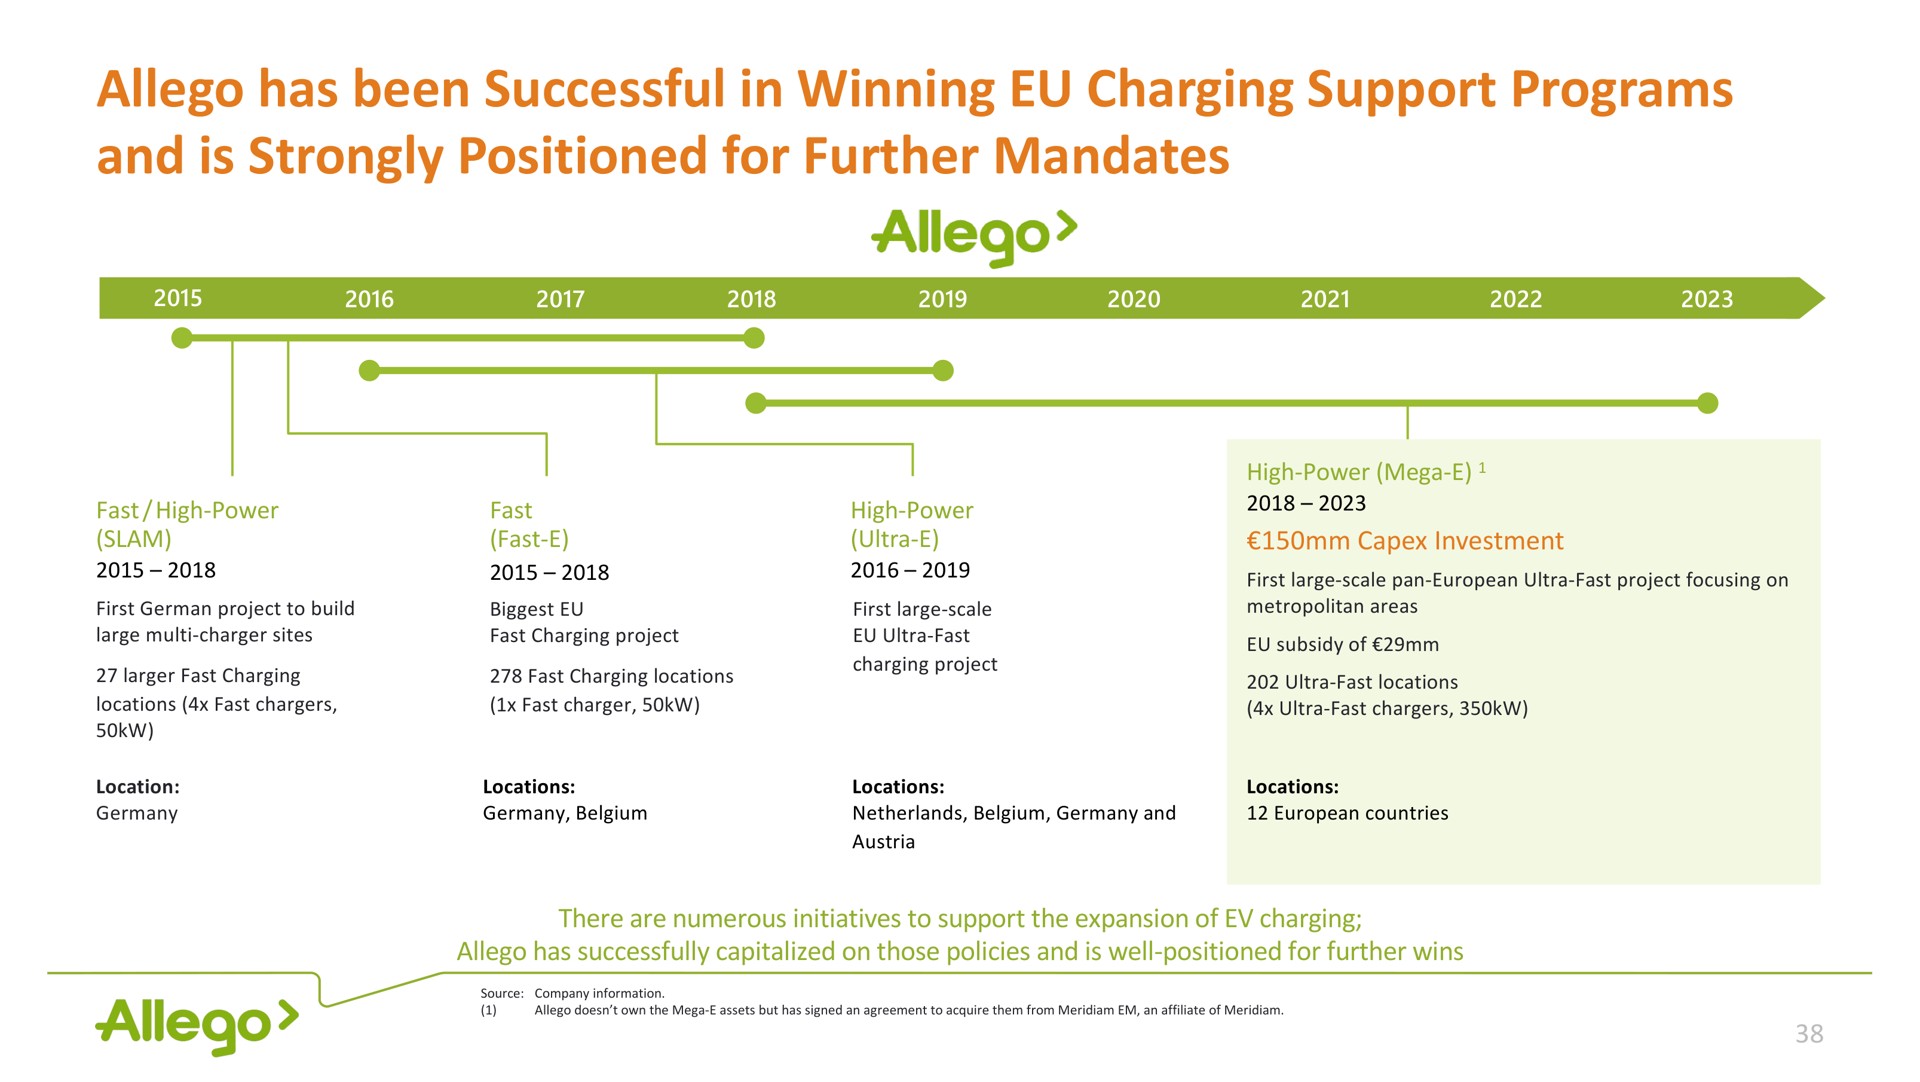 has been successful in winning charging support programs and is strongly positioned for further mandates | Allego